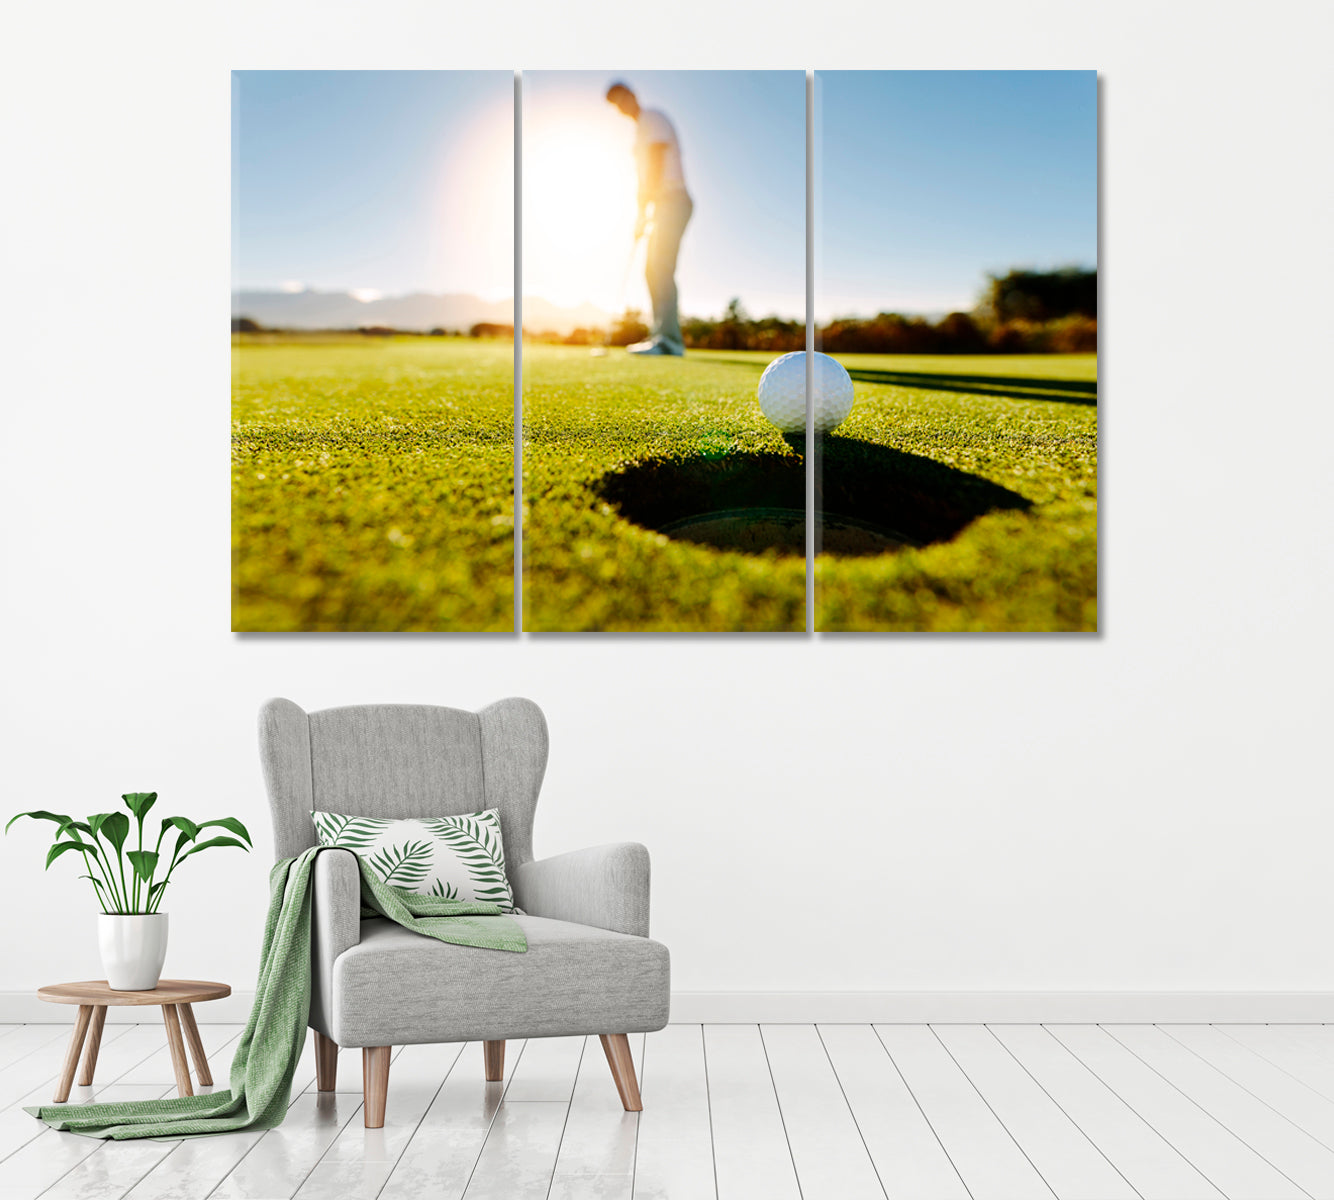 Golfer Putting Golf Ball Into Hole Canvas Print ArtLexy 3 Panels 36"x24" inches 